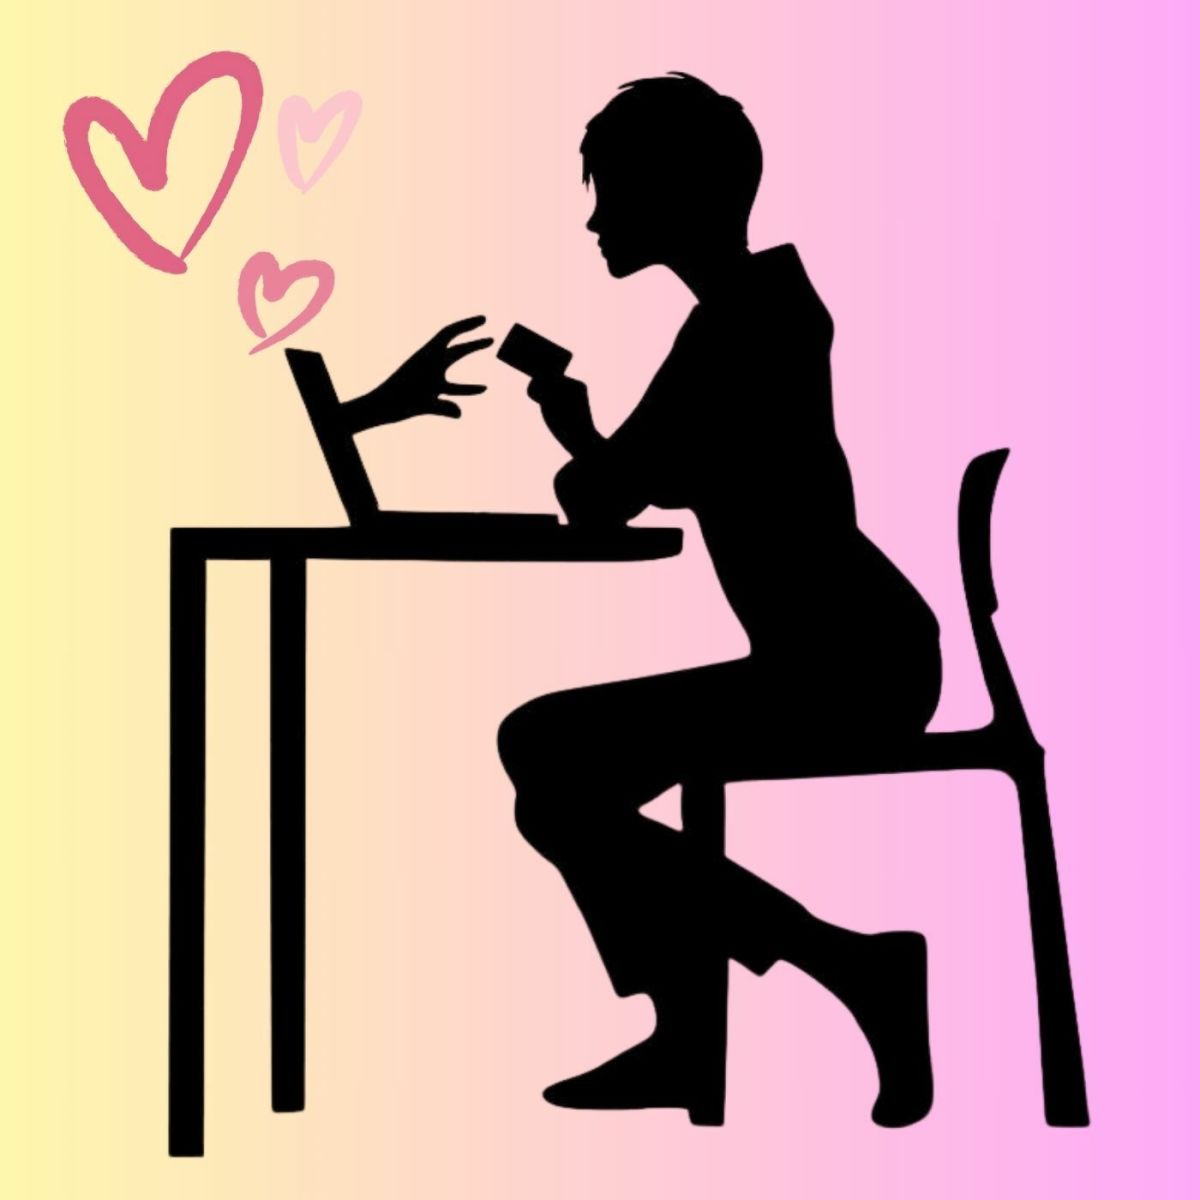 Beware of online dating scams.